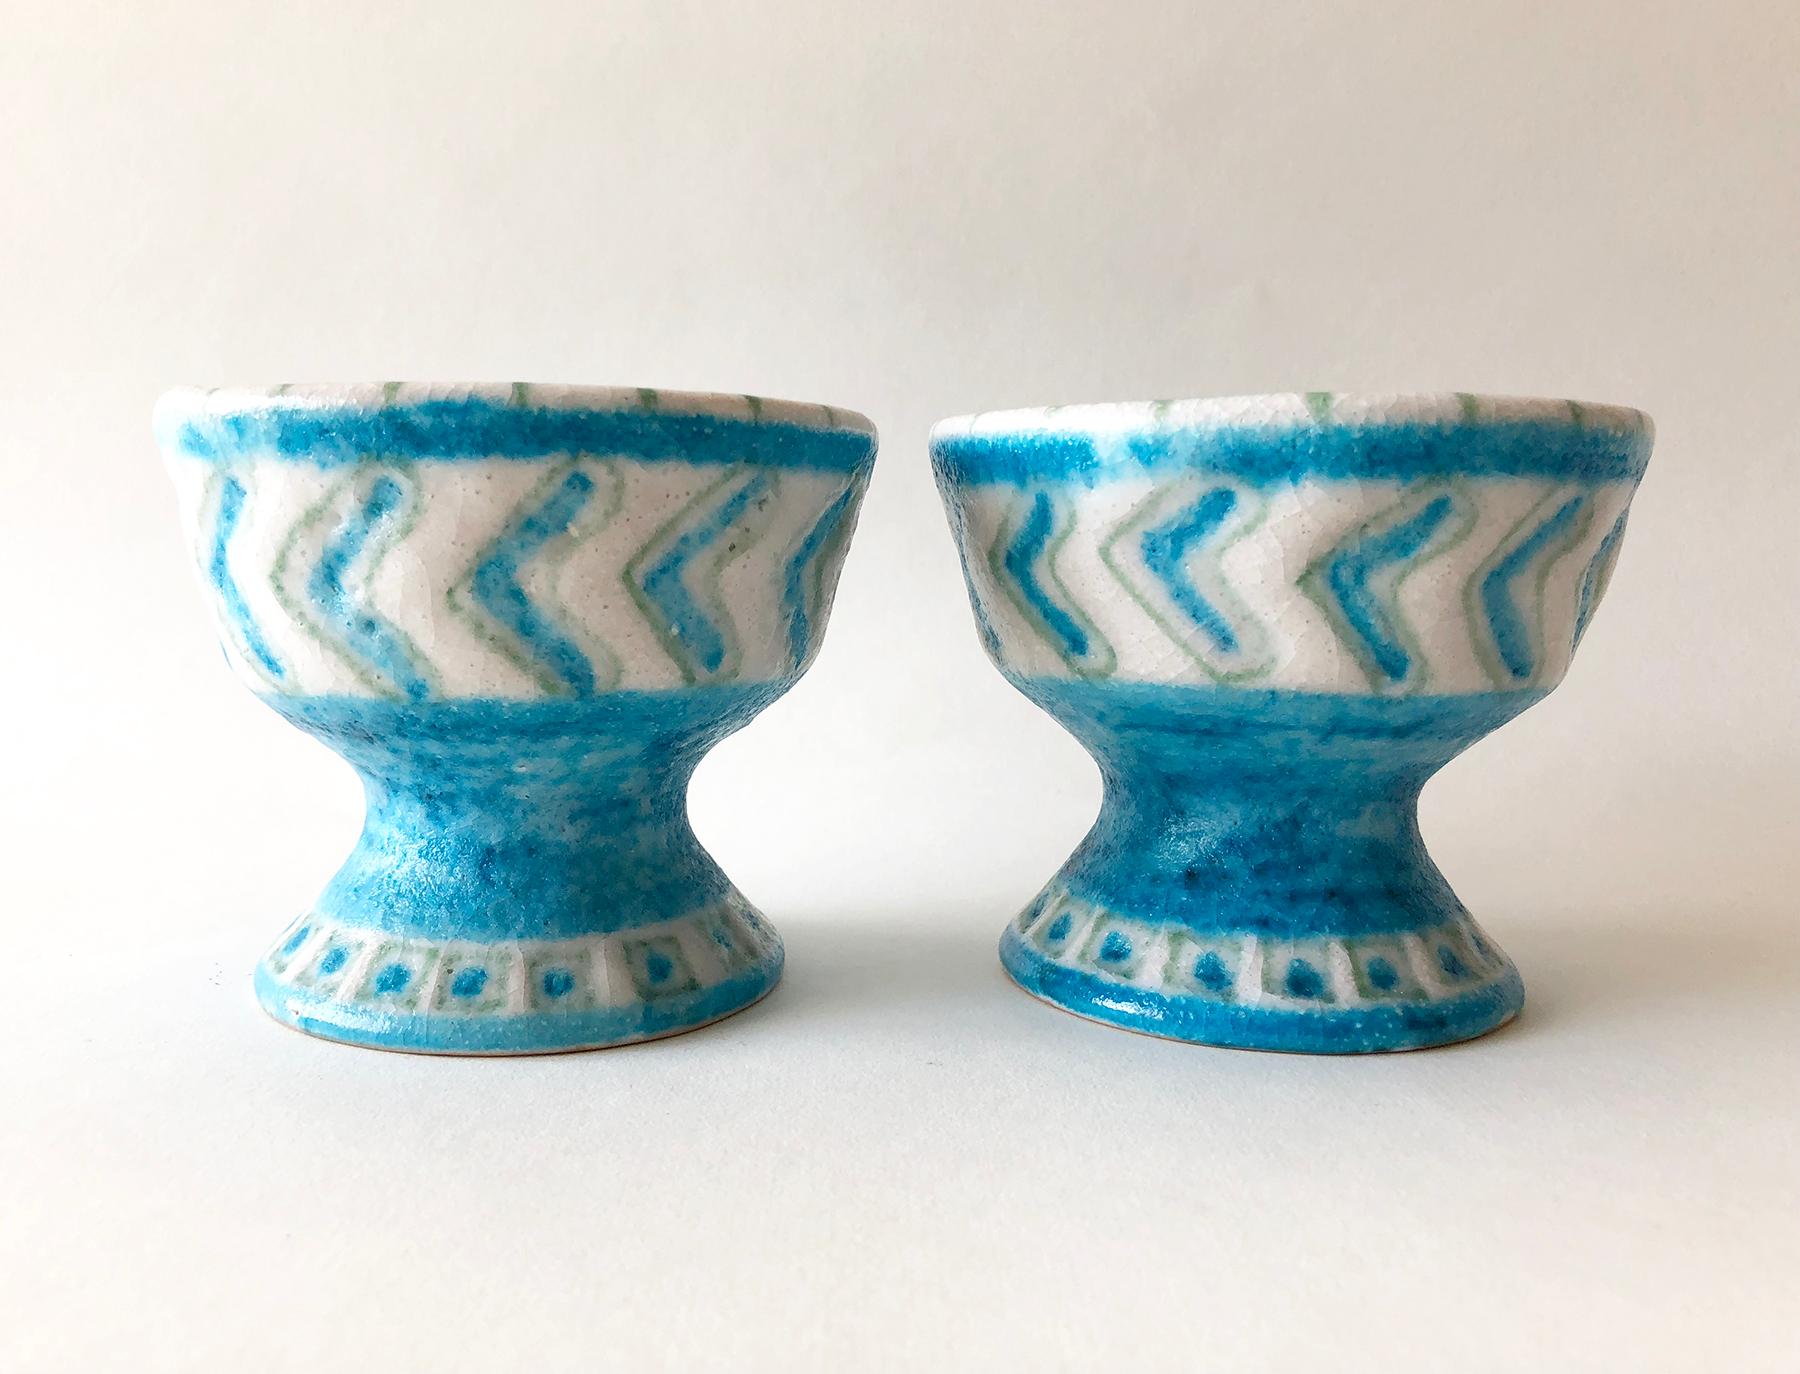 1950s candleholders with foamy glaze created by master ceramist and sculptor, Guido Gambone of Florence, Italy. Candleholders measure 3.5